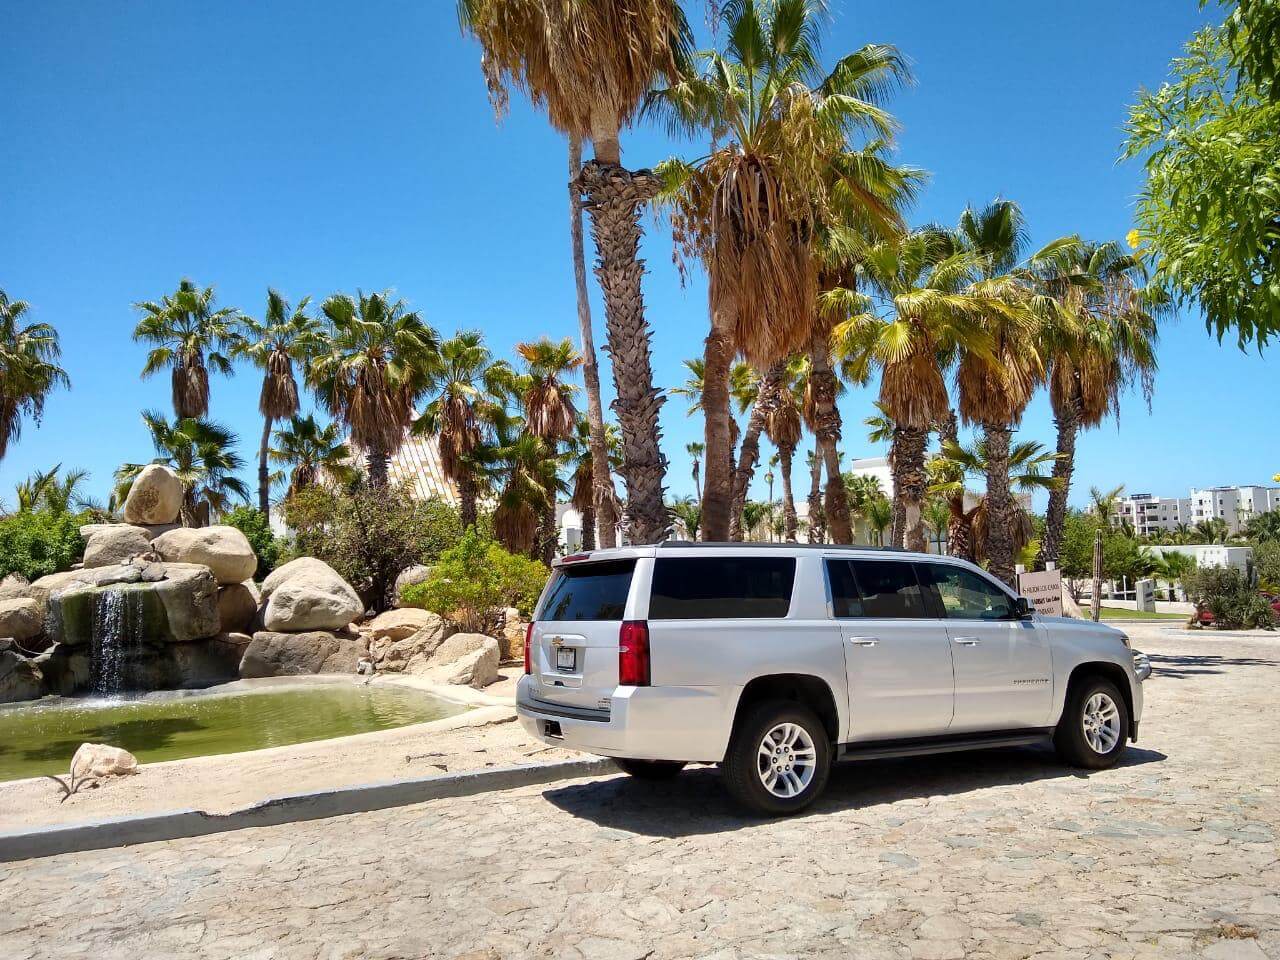 Silver Suburban parked in front of palm trees